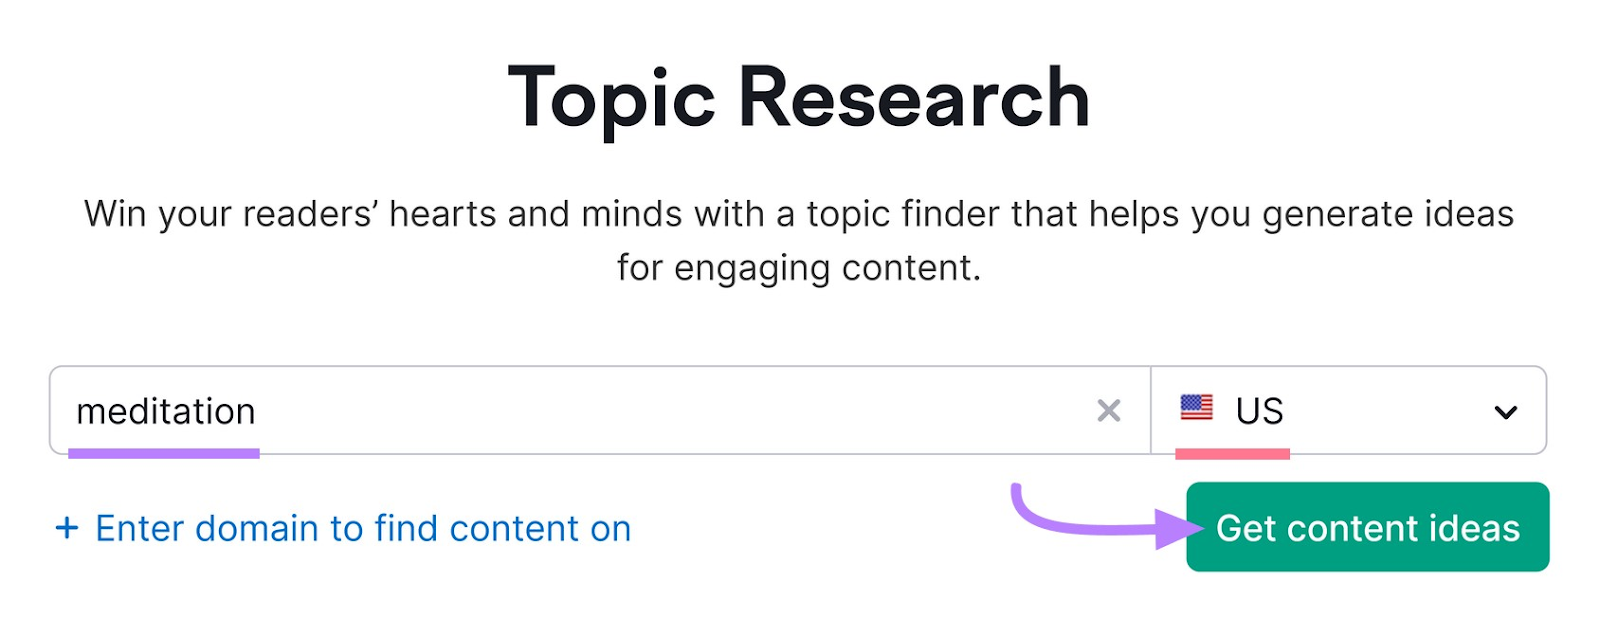 "meditation" entered in Topic Research tool search bar